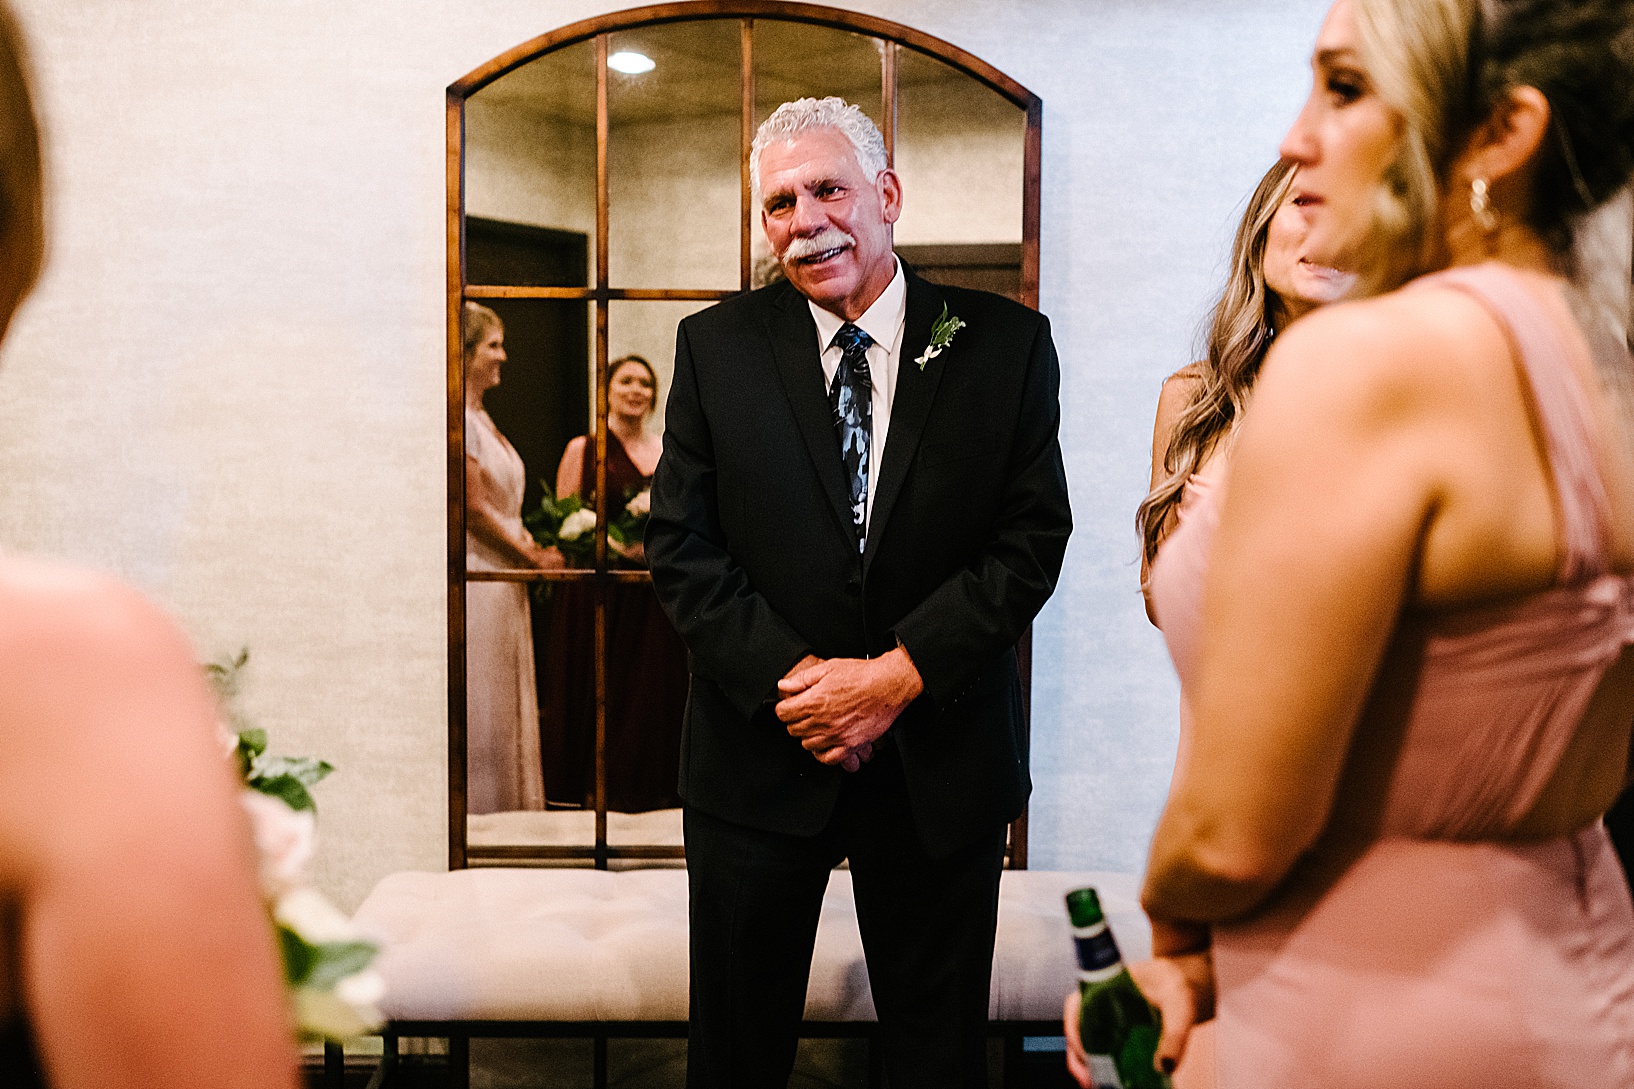 Father of the bride smiling with love as he sees the bride for the first time.